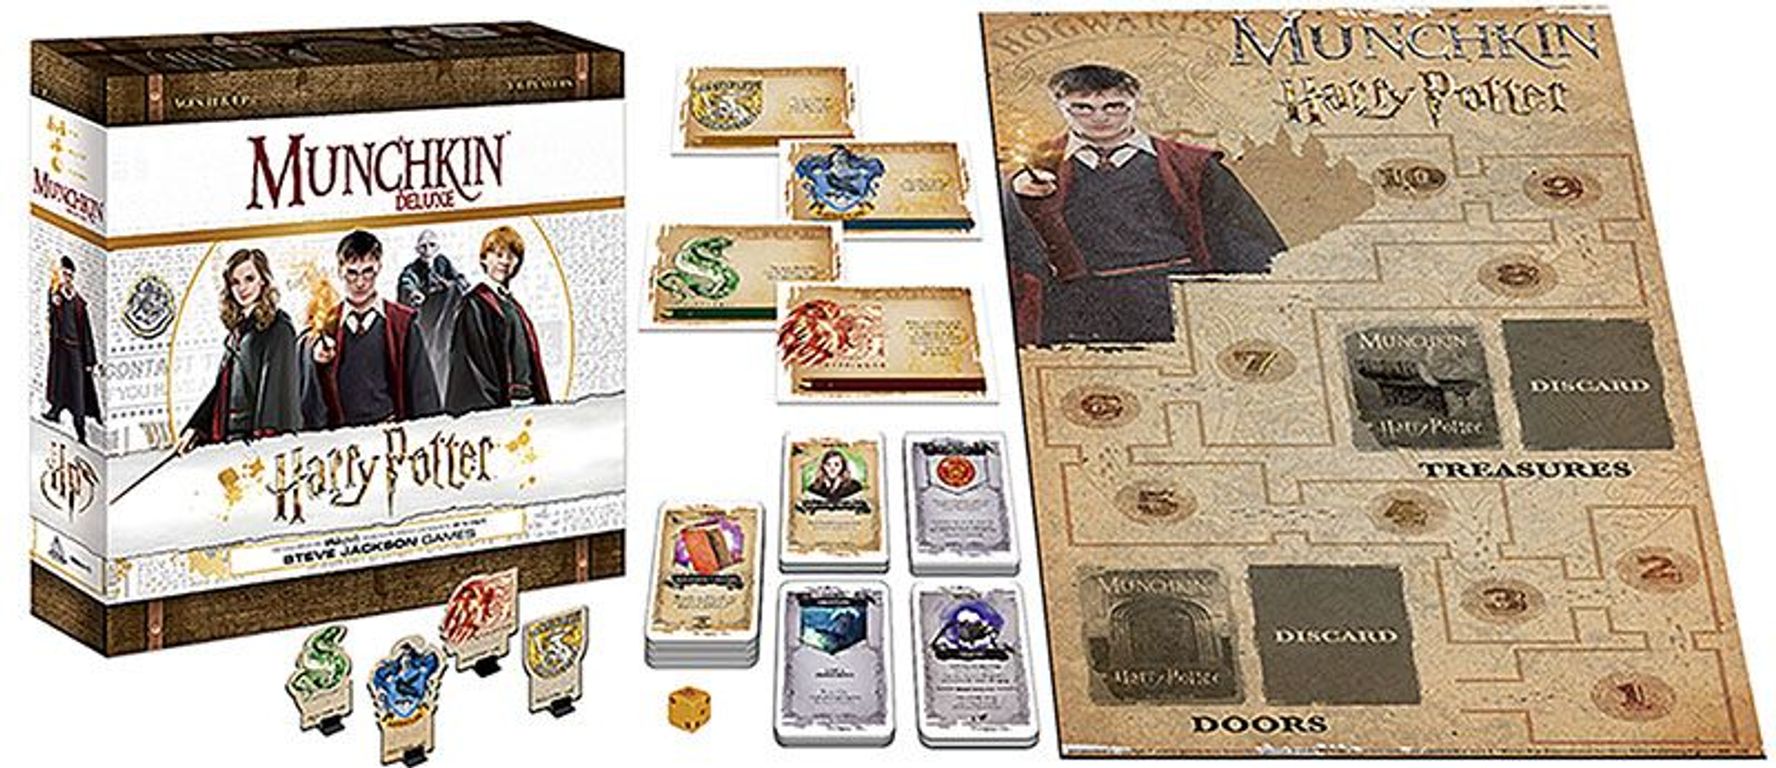 Munchkin Harry Potter components